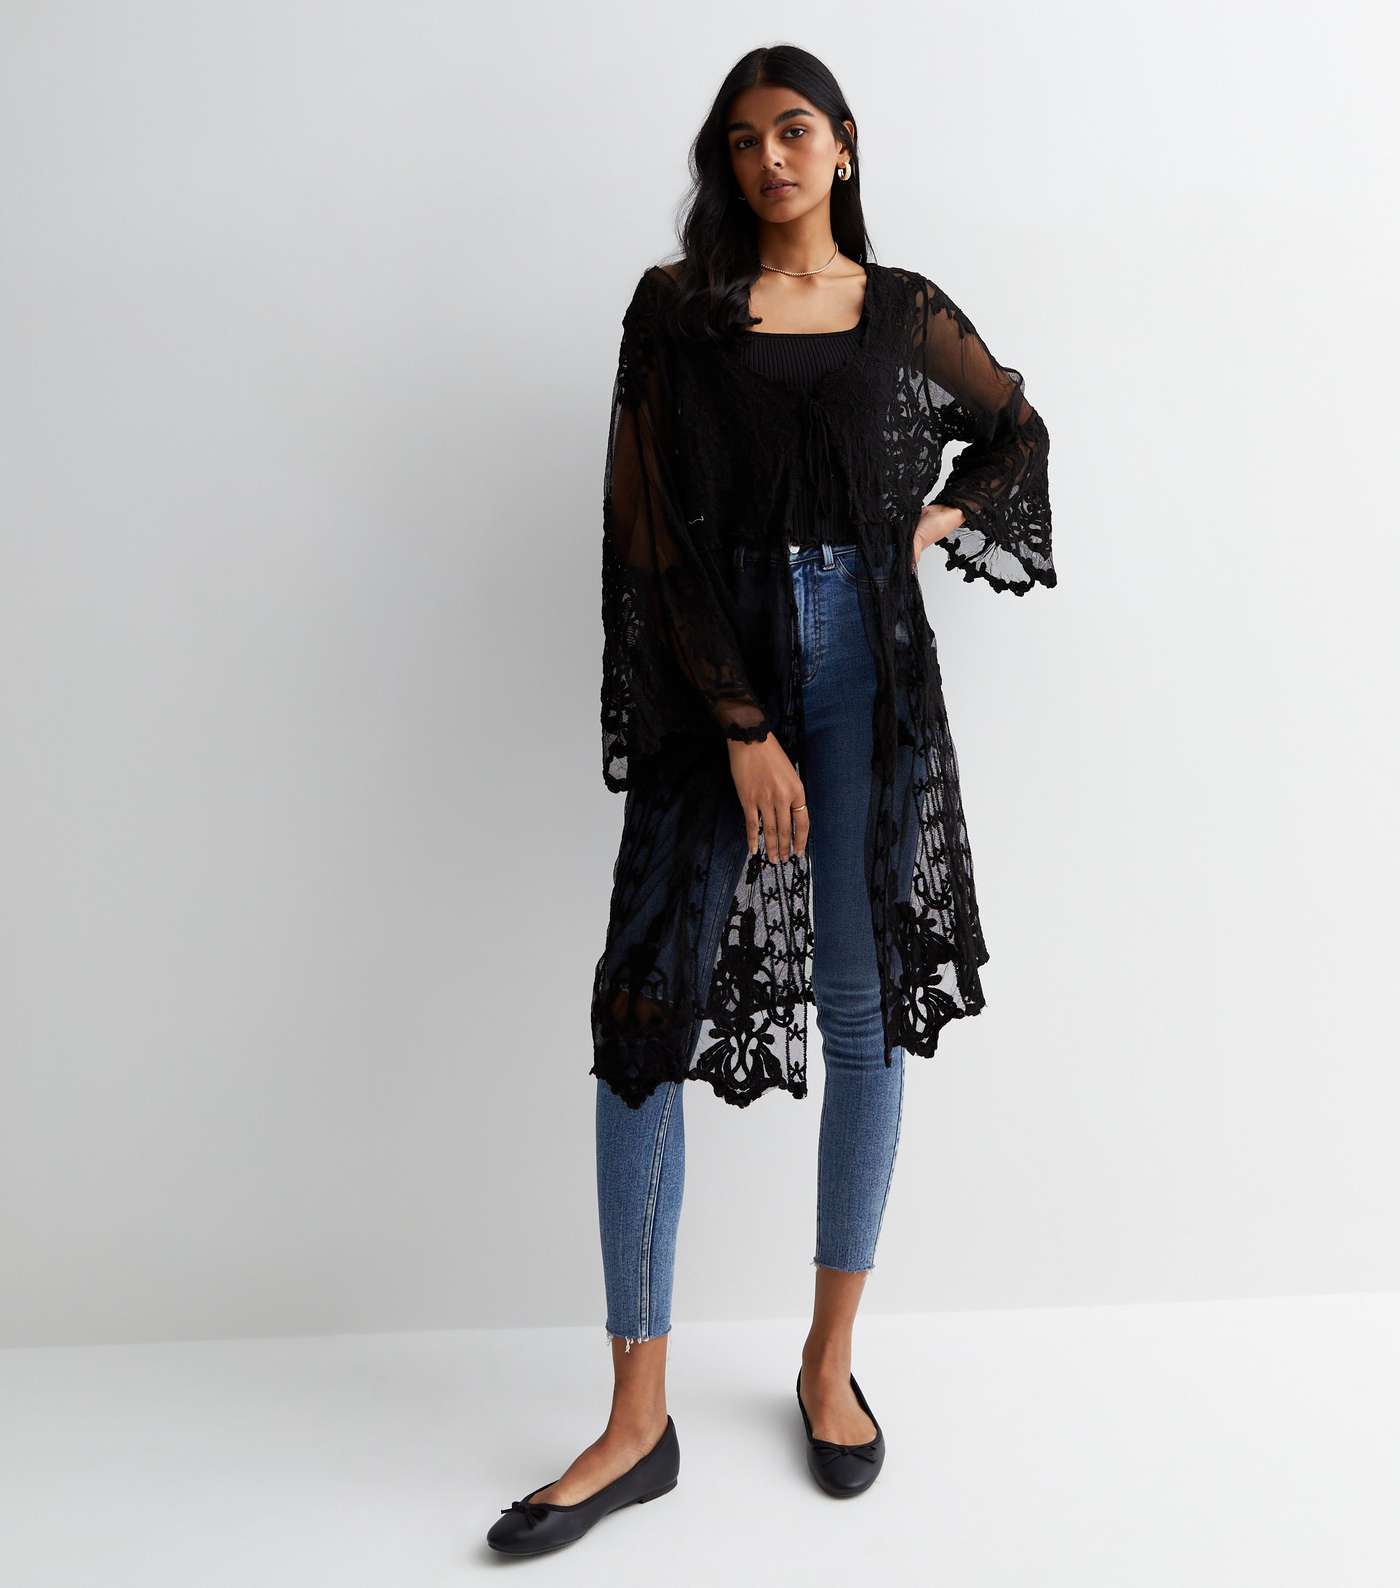 Gini London Black Cotton Embroidered Crochet Knit Cardigan Image 2